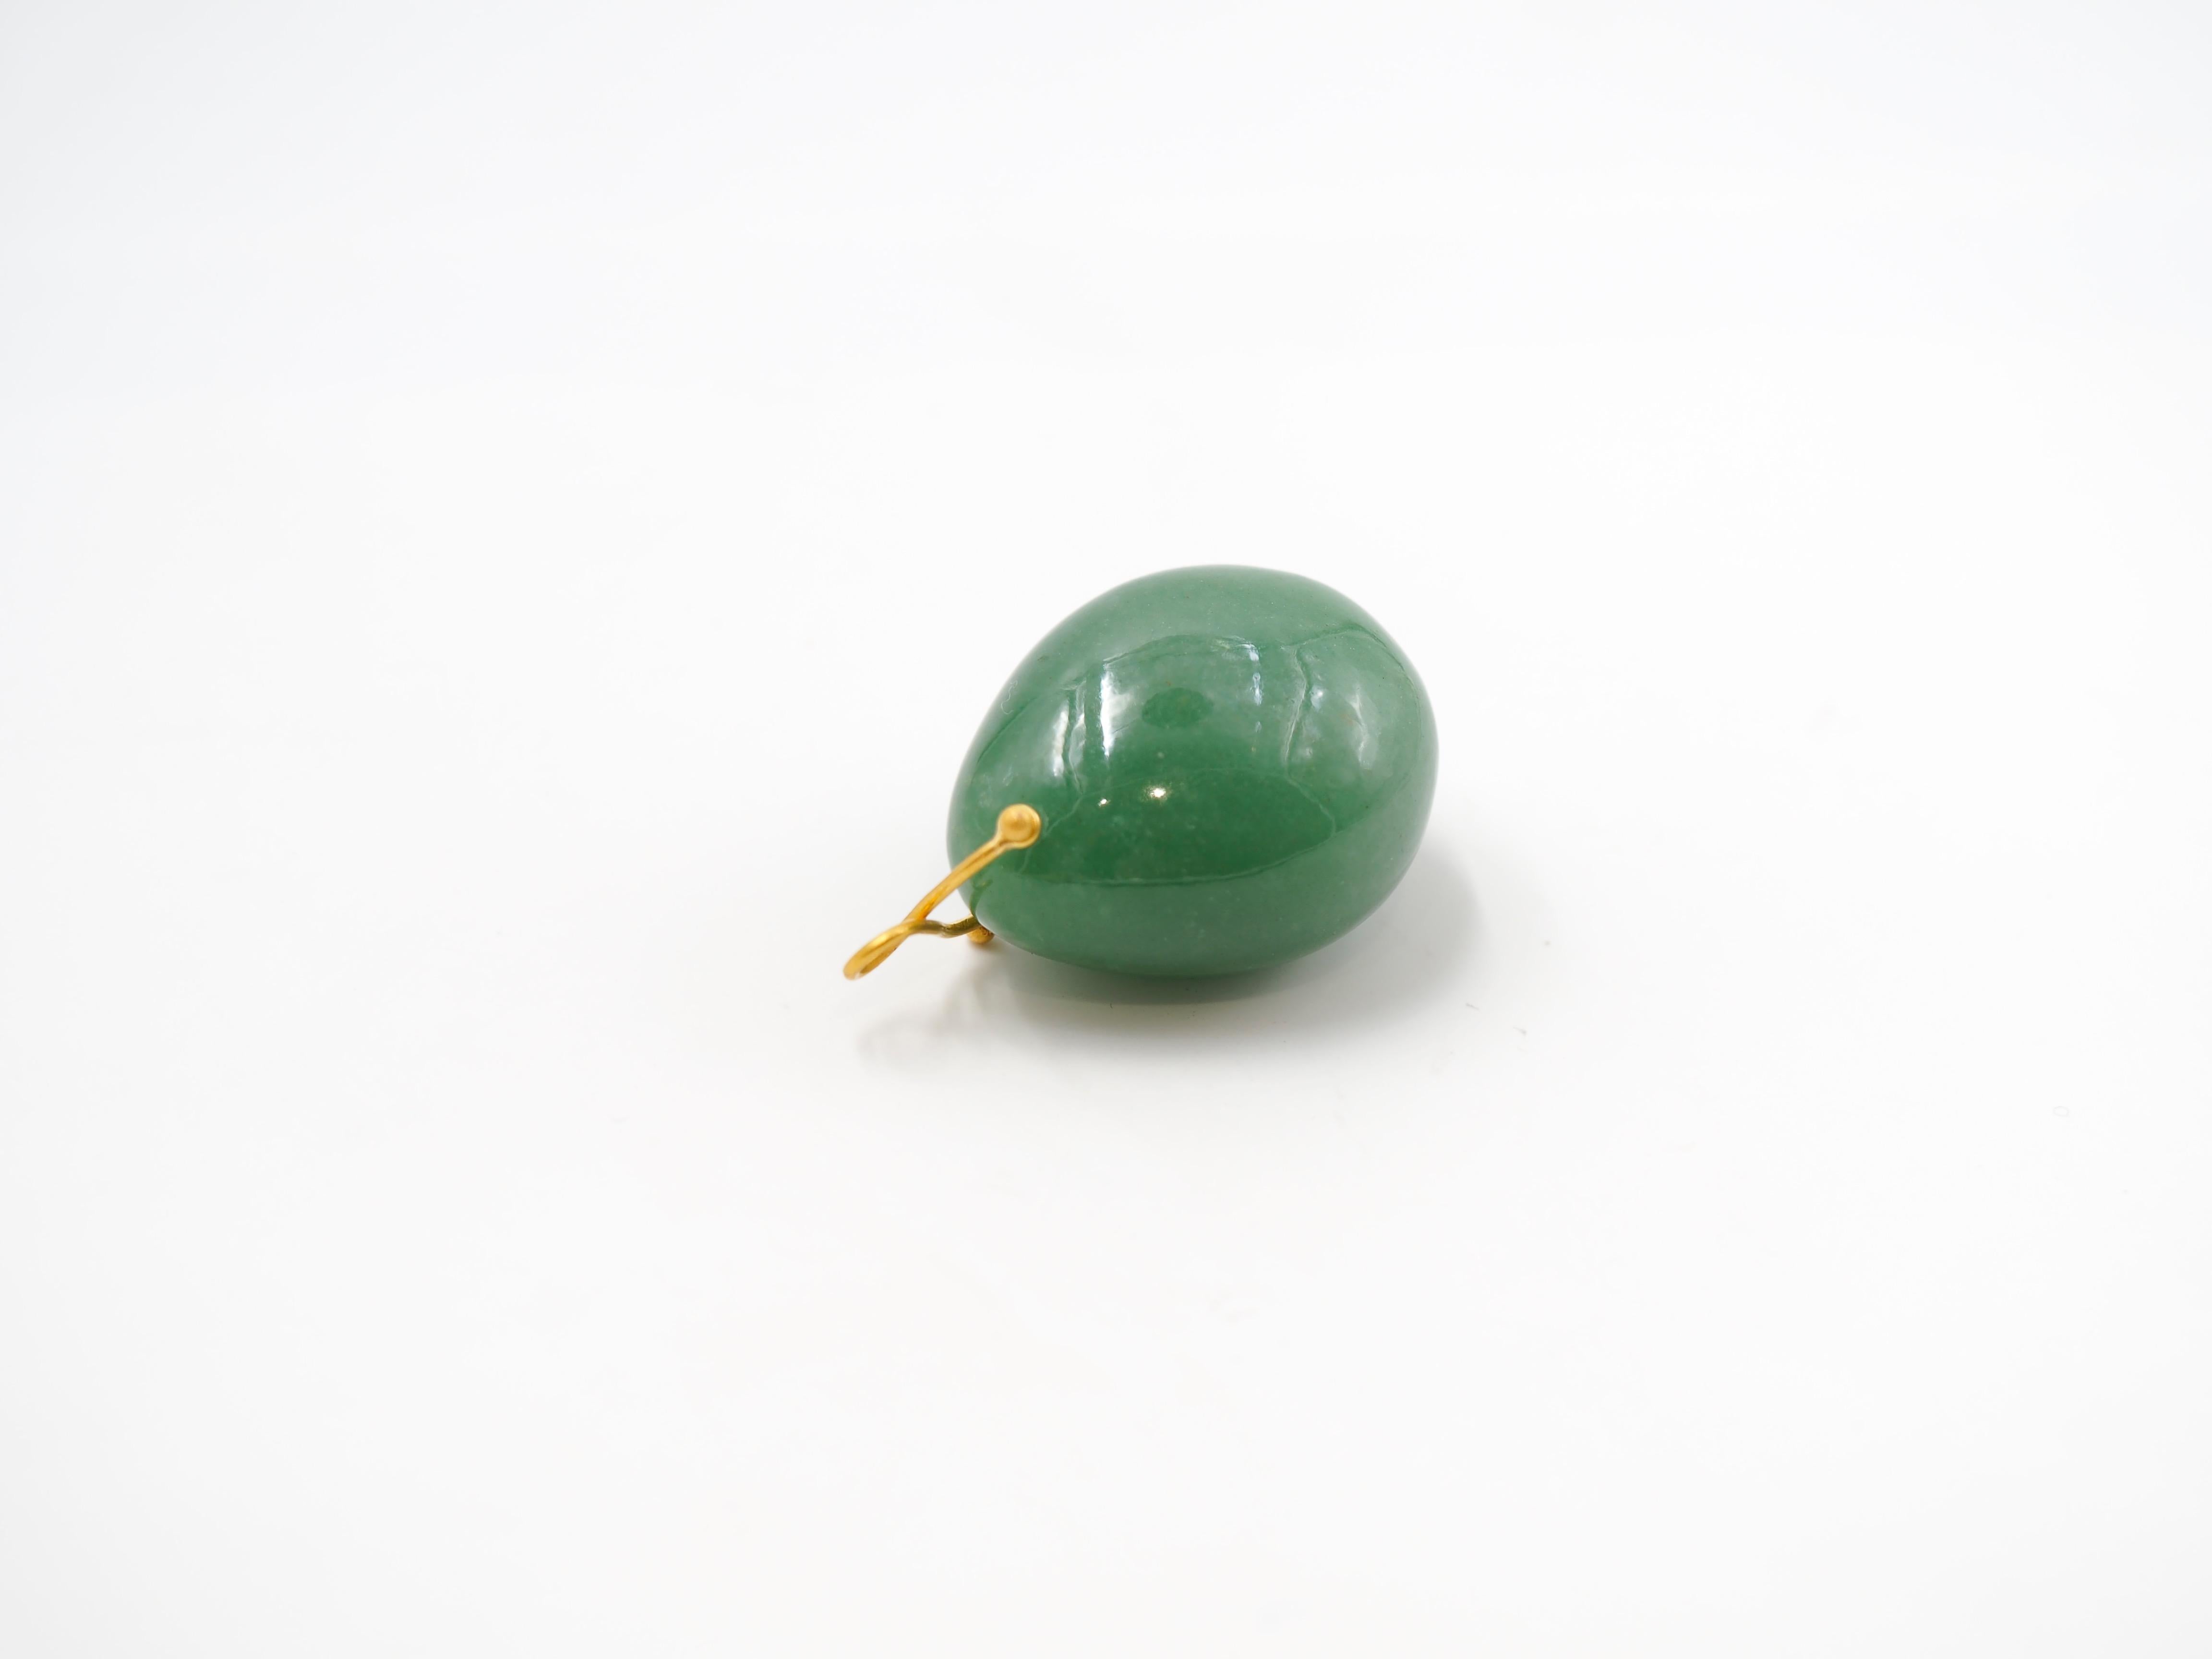 Hand-carved and handmade pendant, this stone is simply drilled to allow a 22 karat gold wire that is twisted to make a ring. 
This large pendant has a green aventurine of approx 140 carats. 
3 stone sizes exist as you can see on the photo. 
The